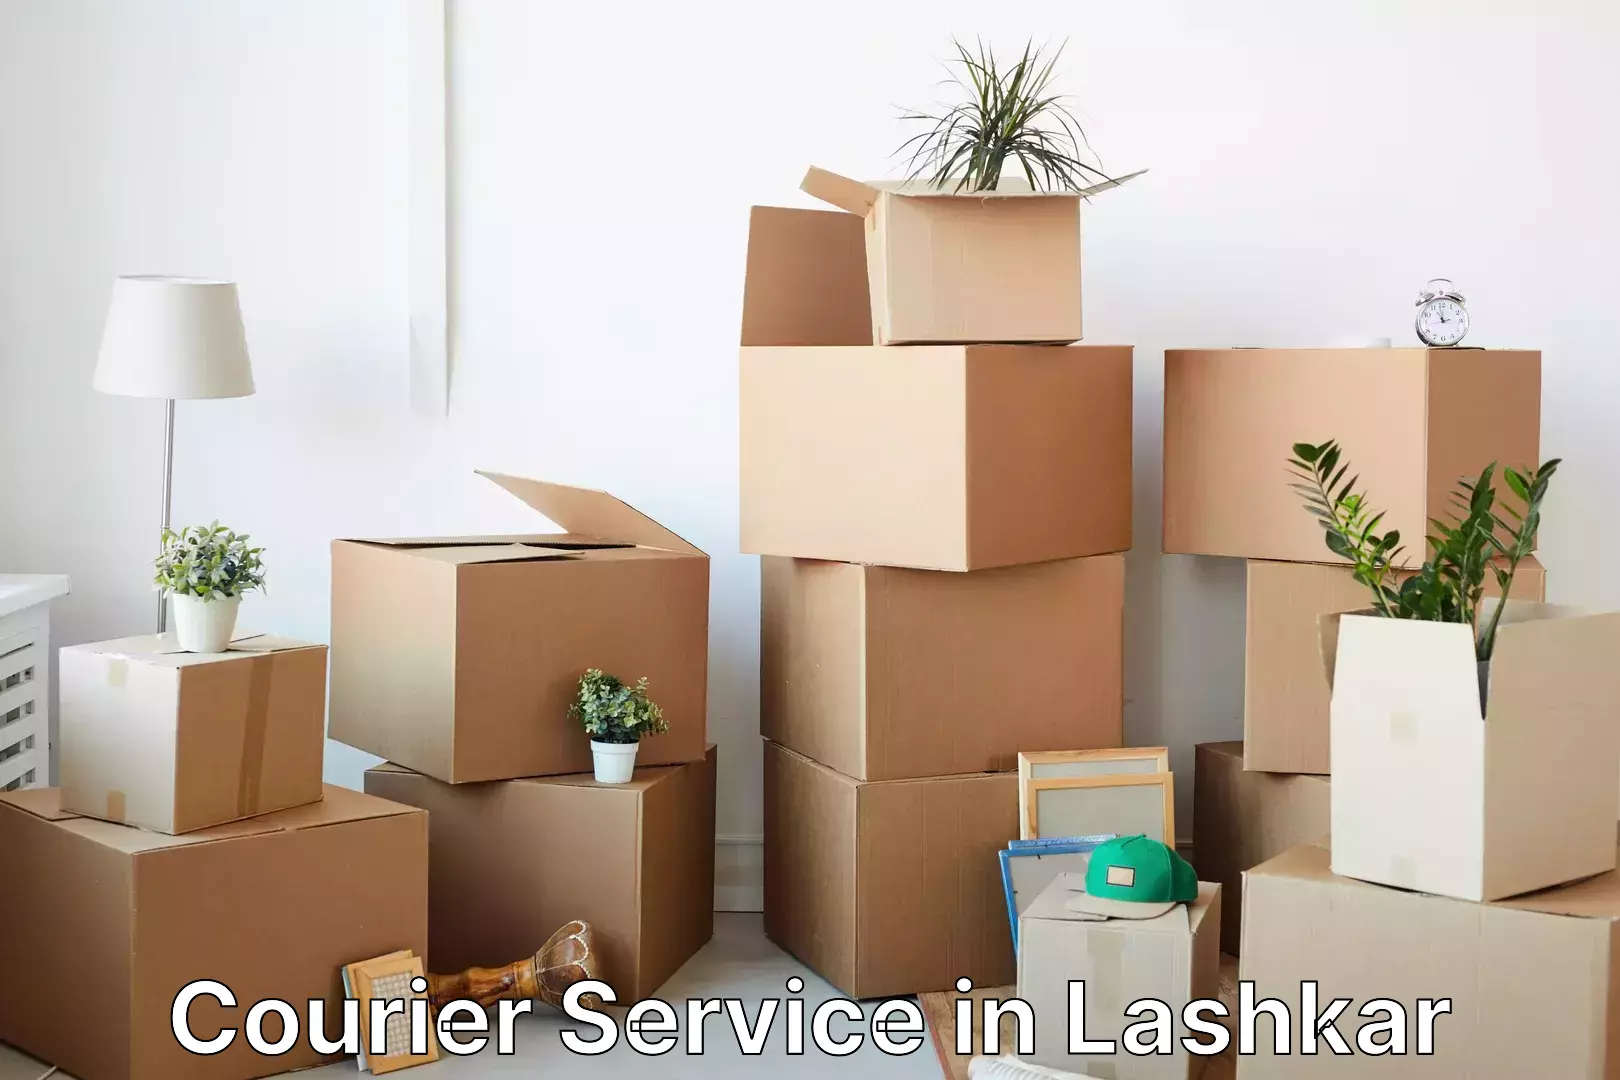 State-of-the-art courier technology in Lashkar